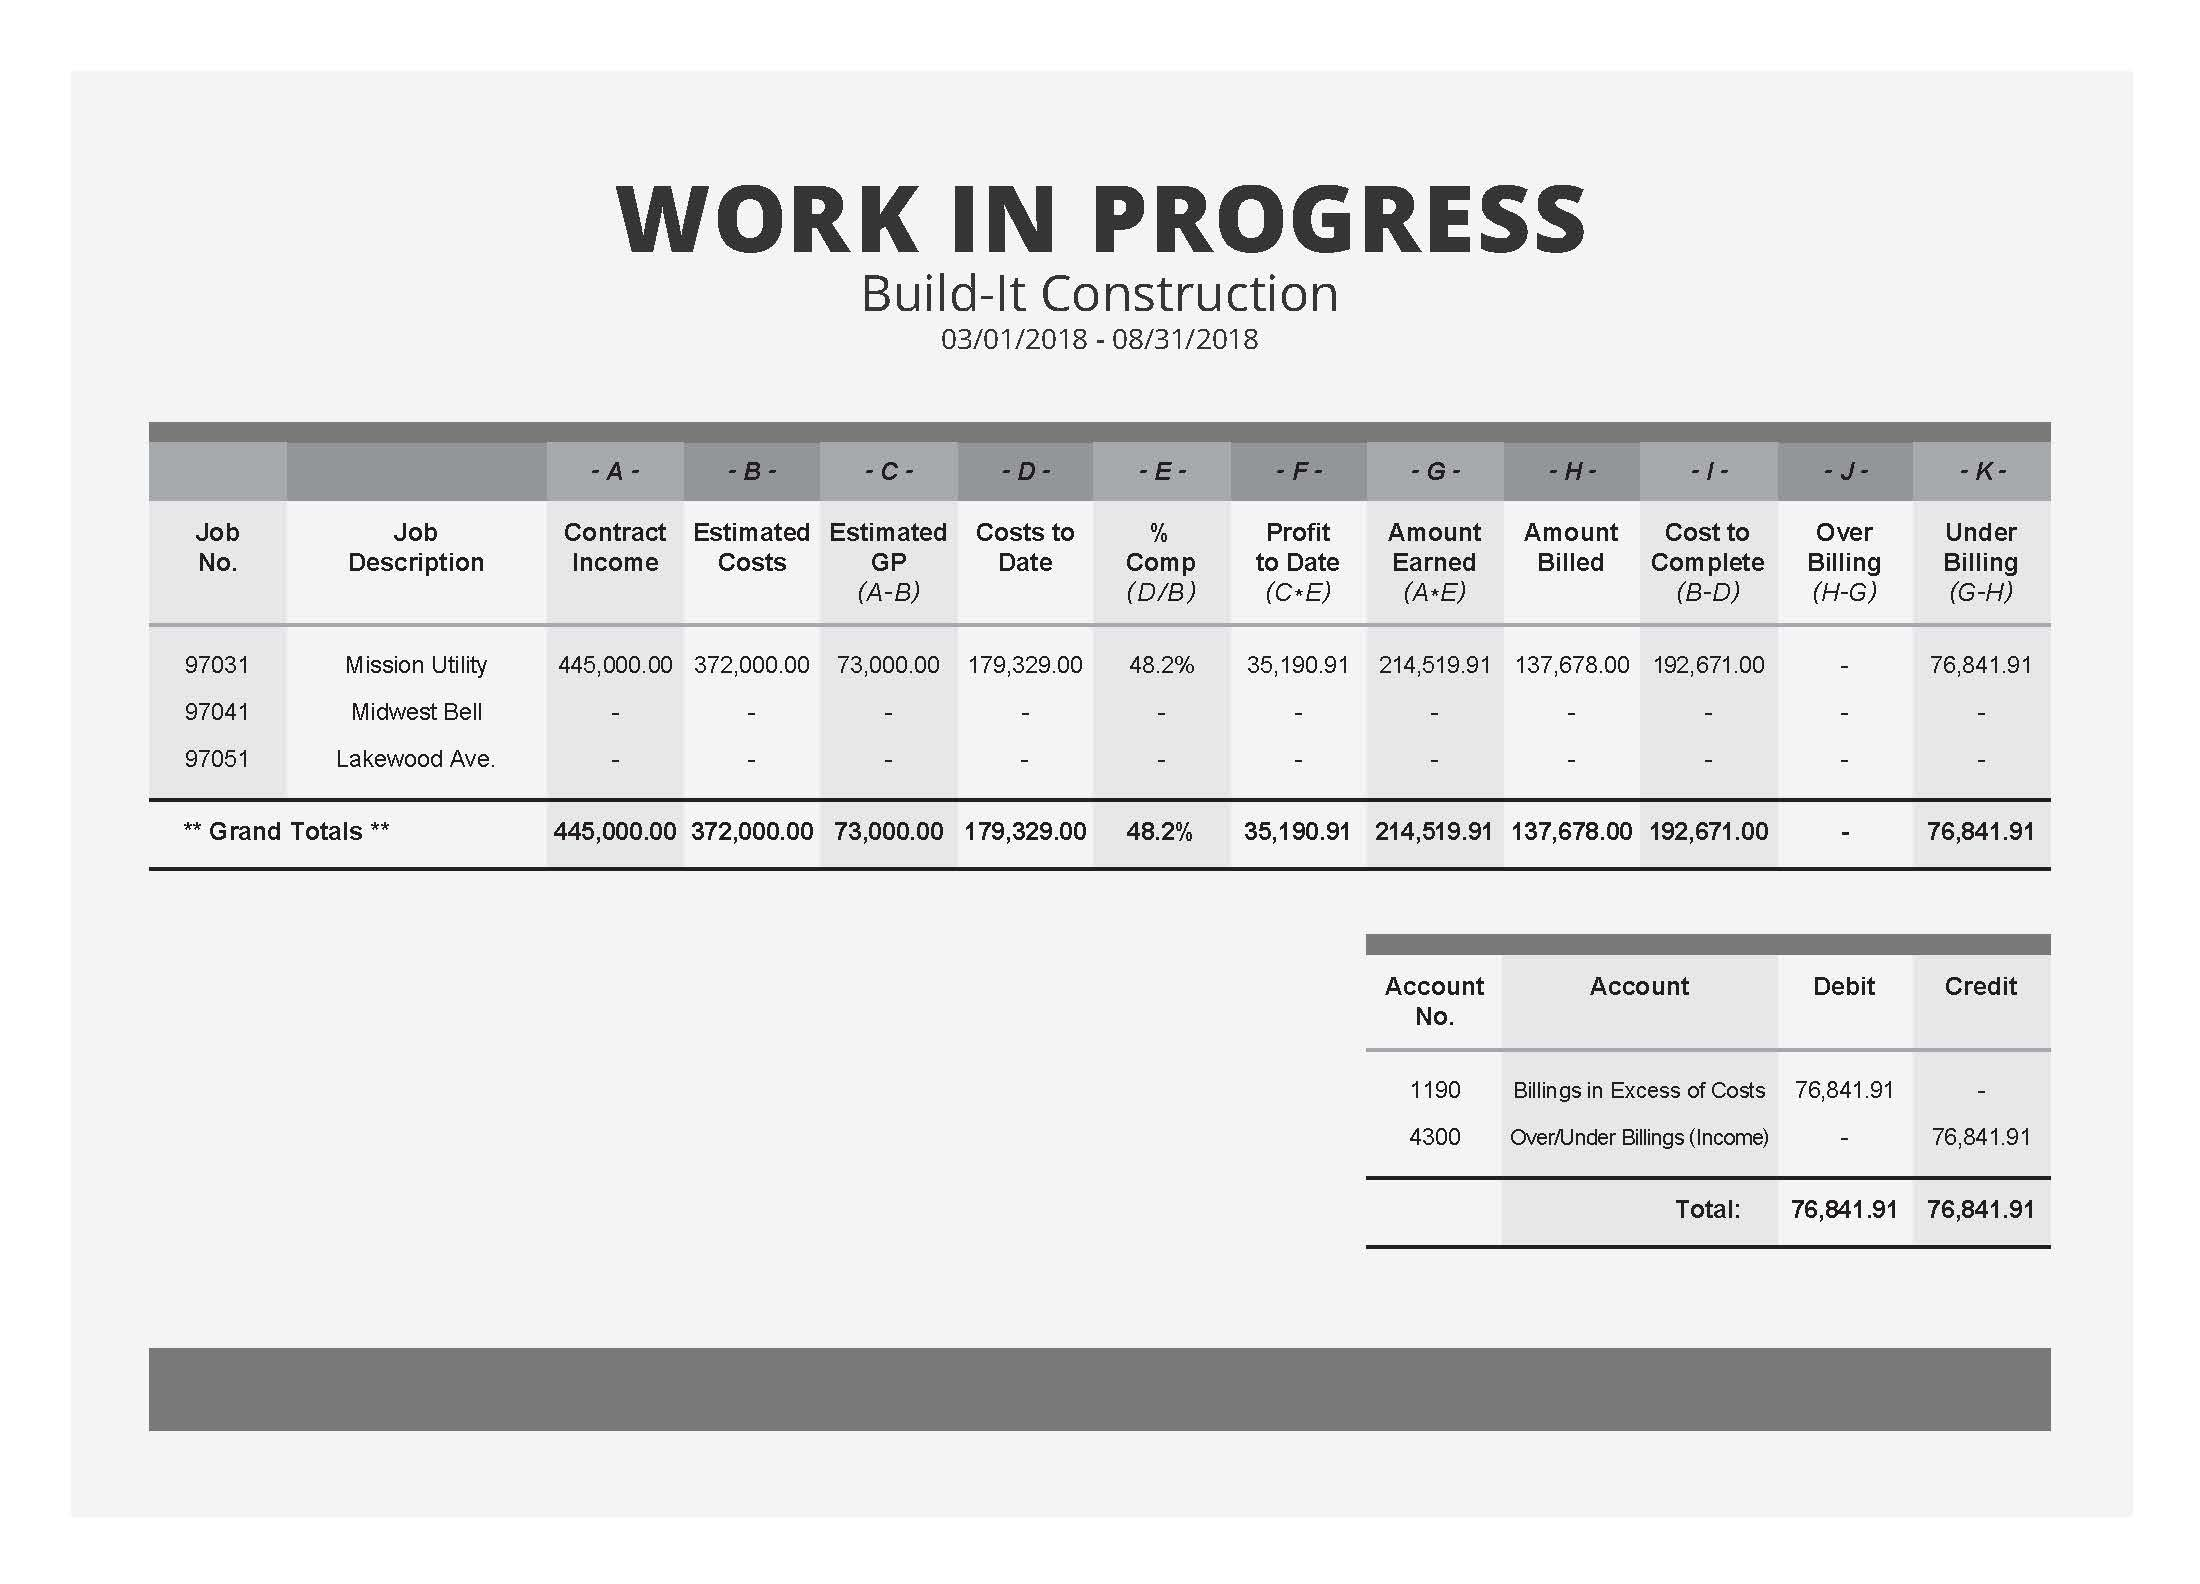 The Field Guide To Construction Wip Reports [Sample Wip Report] Throughout Construction Work In Progress Spreadsheet